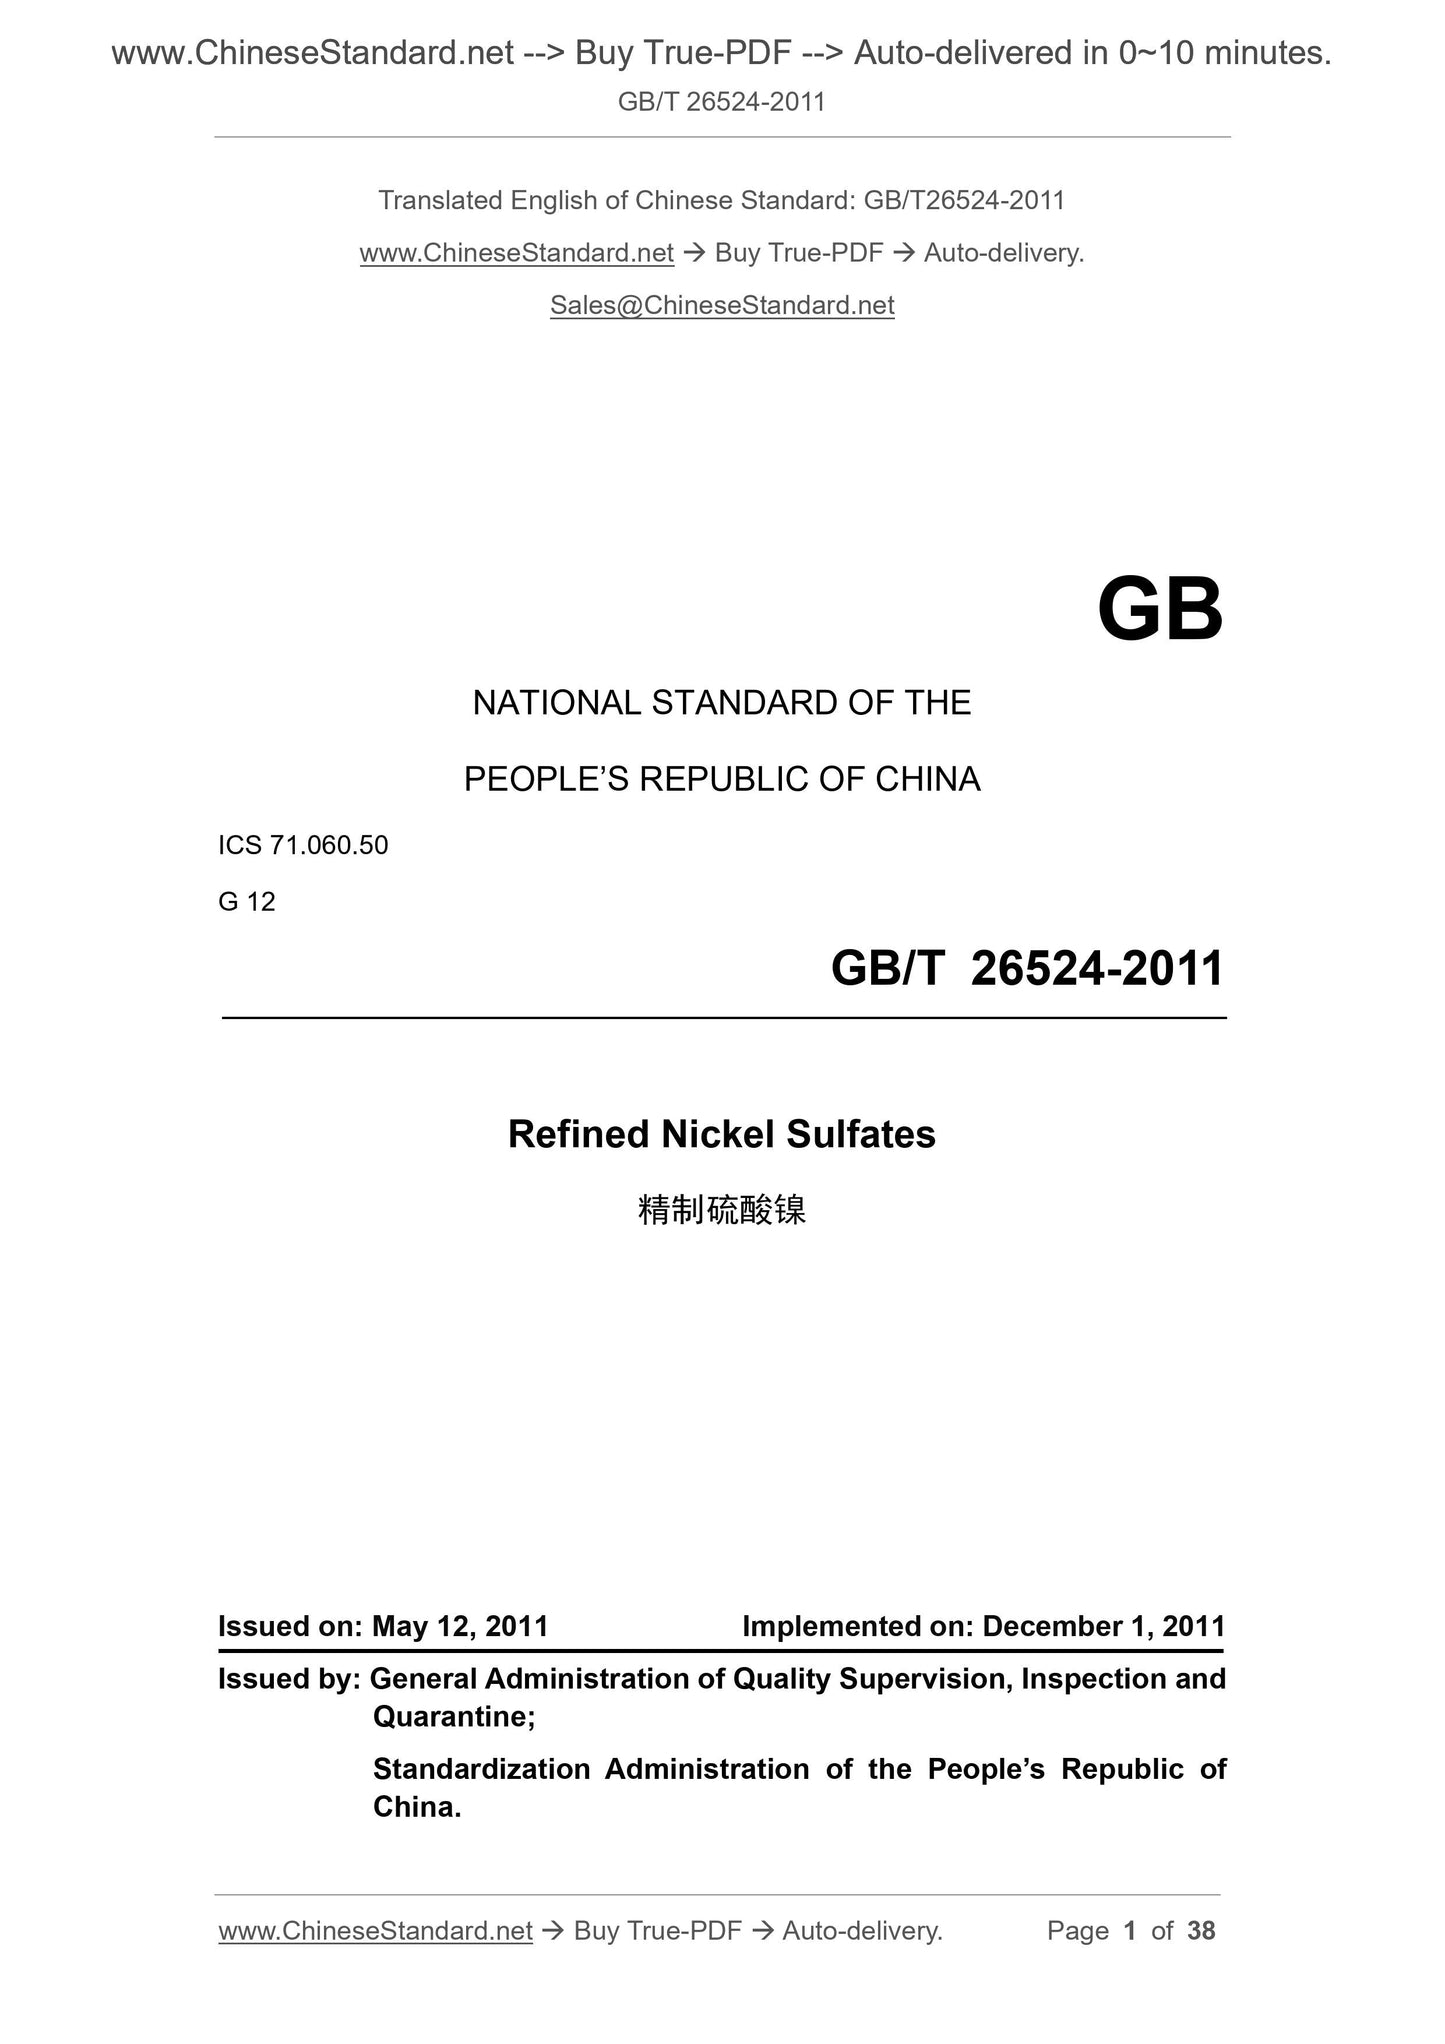 GB/T 26524-2011 Page 1